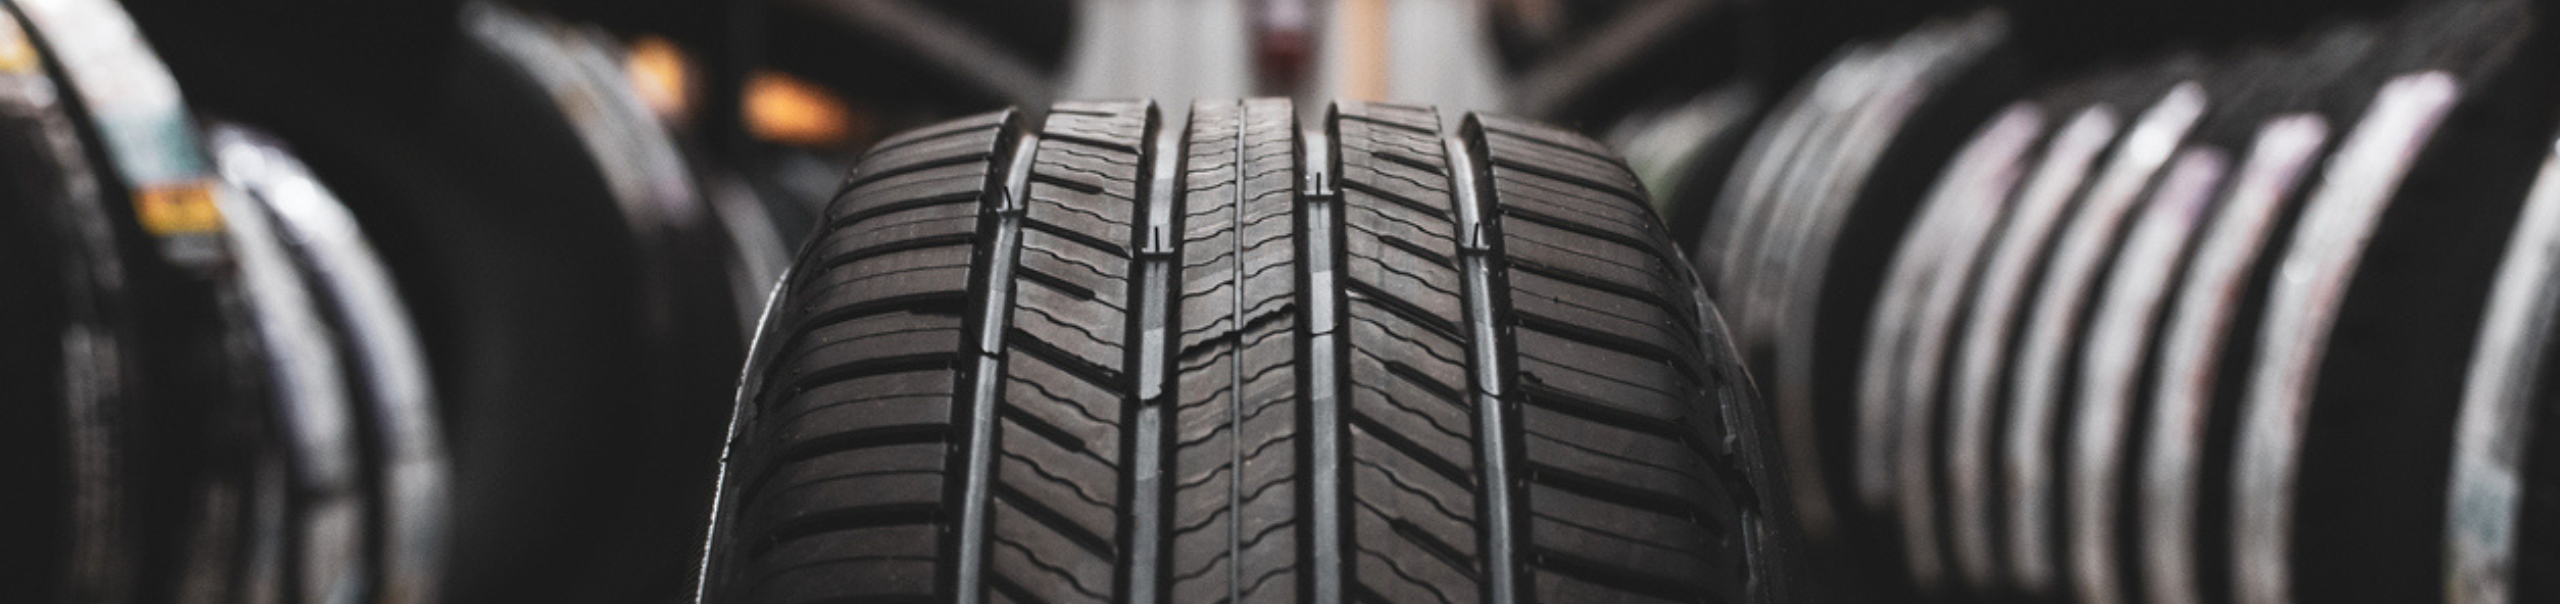 Tyres in stock image